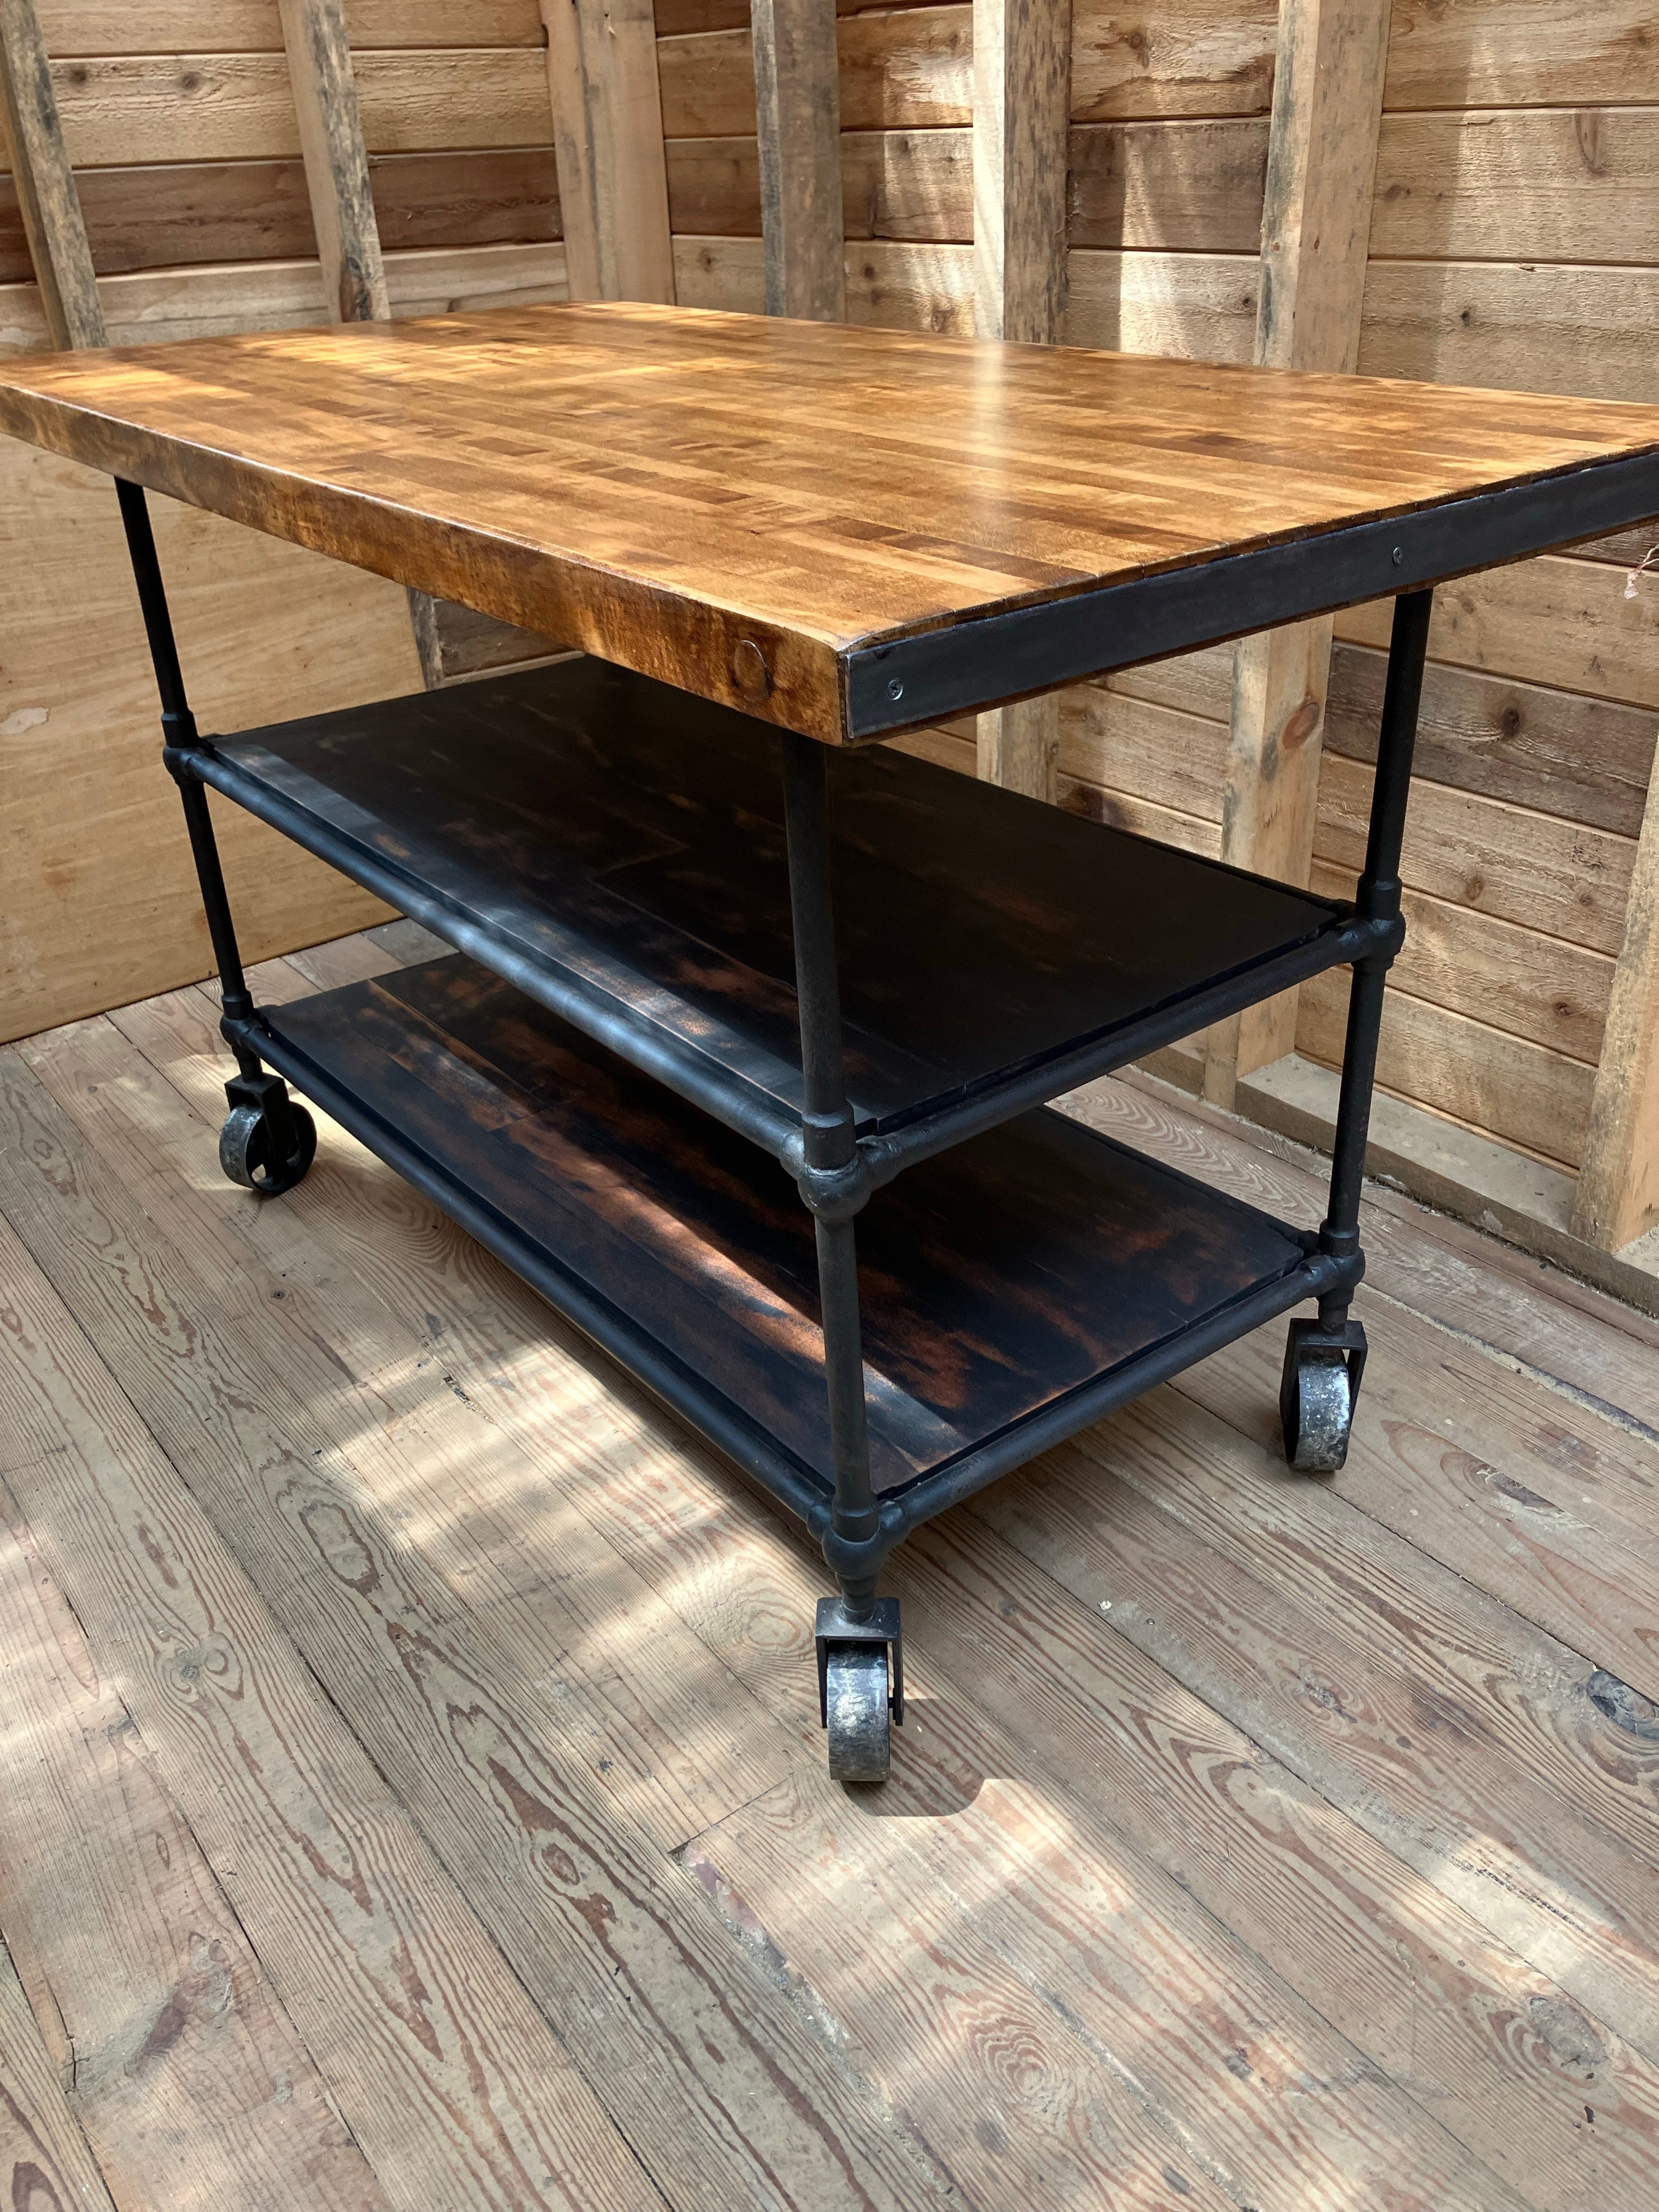 Very nice welded steel base ca 1940’s with vintage restored Maple butcher block top. Heavy steel casters and functional steel edge on each end of the top. Plenty of storage on the two fitted wood shelves below. Great island, work table, or bar cart.